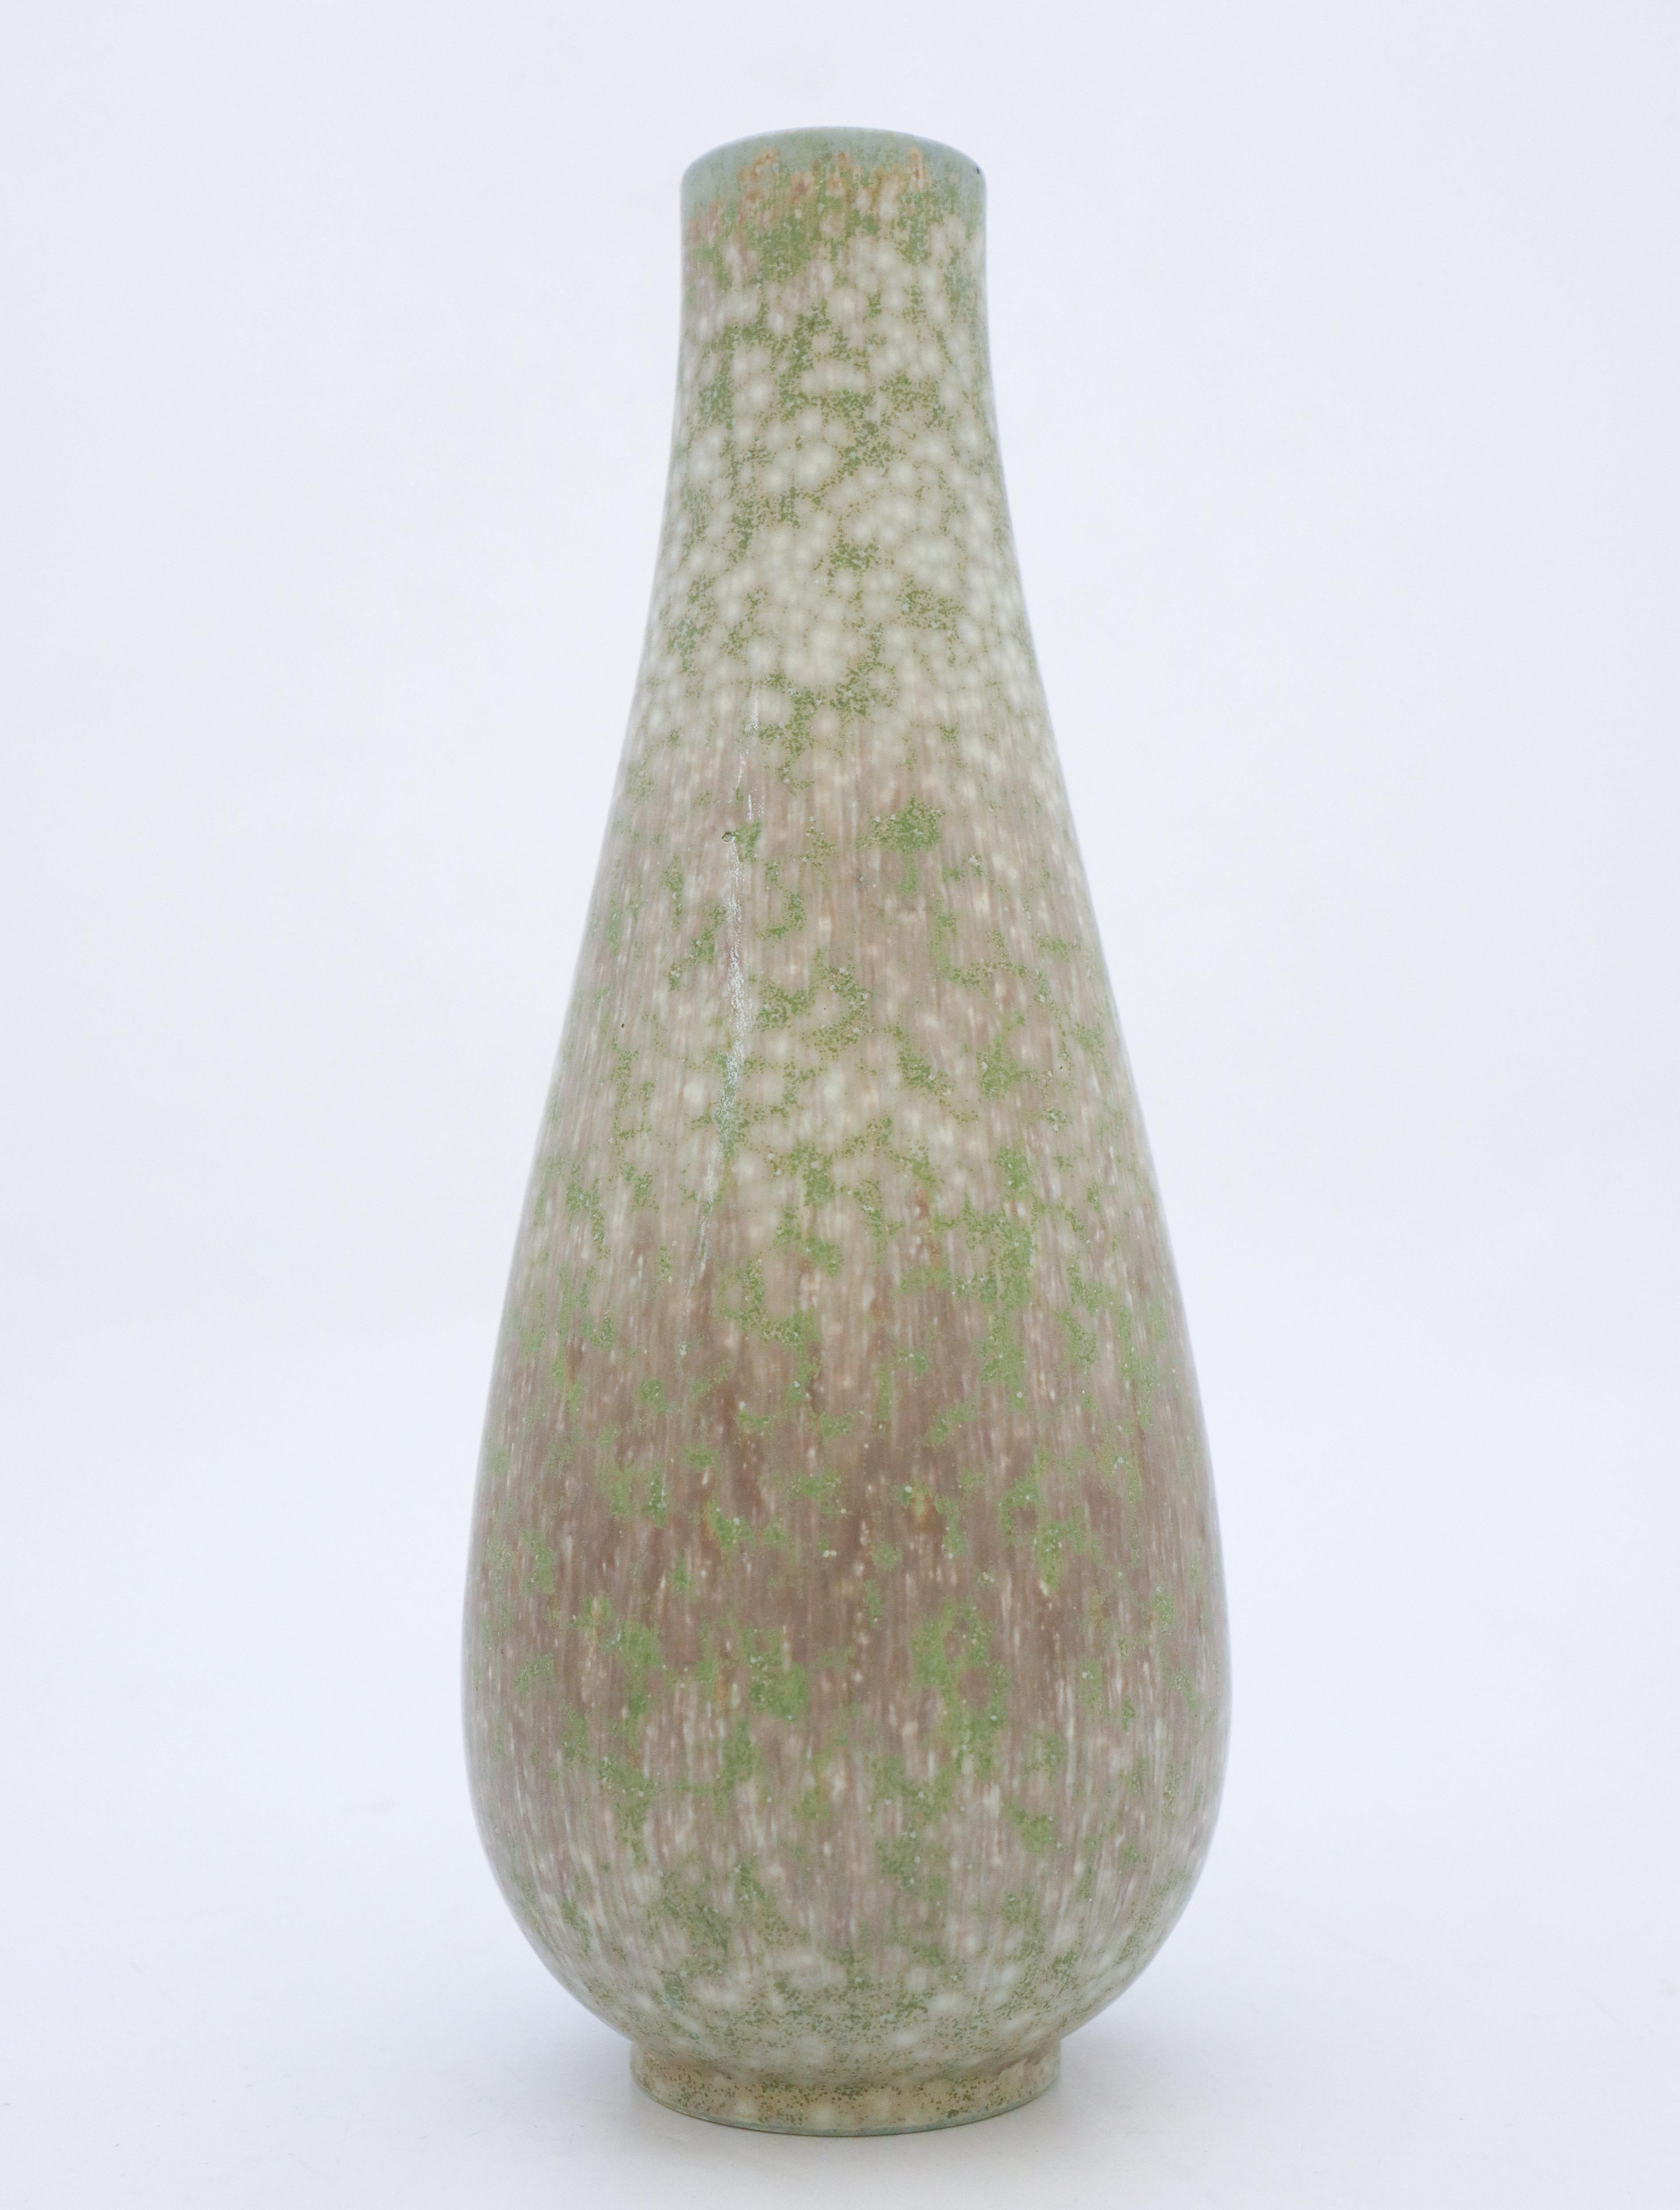 A lovely gray and green vase designed by Gunnar Nylund at Rörstrand, it´s 28 cm high and it has a lovely glaze, it´s in excellent condition except from a mark in the glaze from the production, why it is marked as 2nd quality.

Gunnar Nylund was